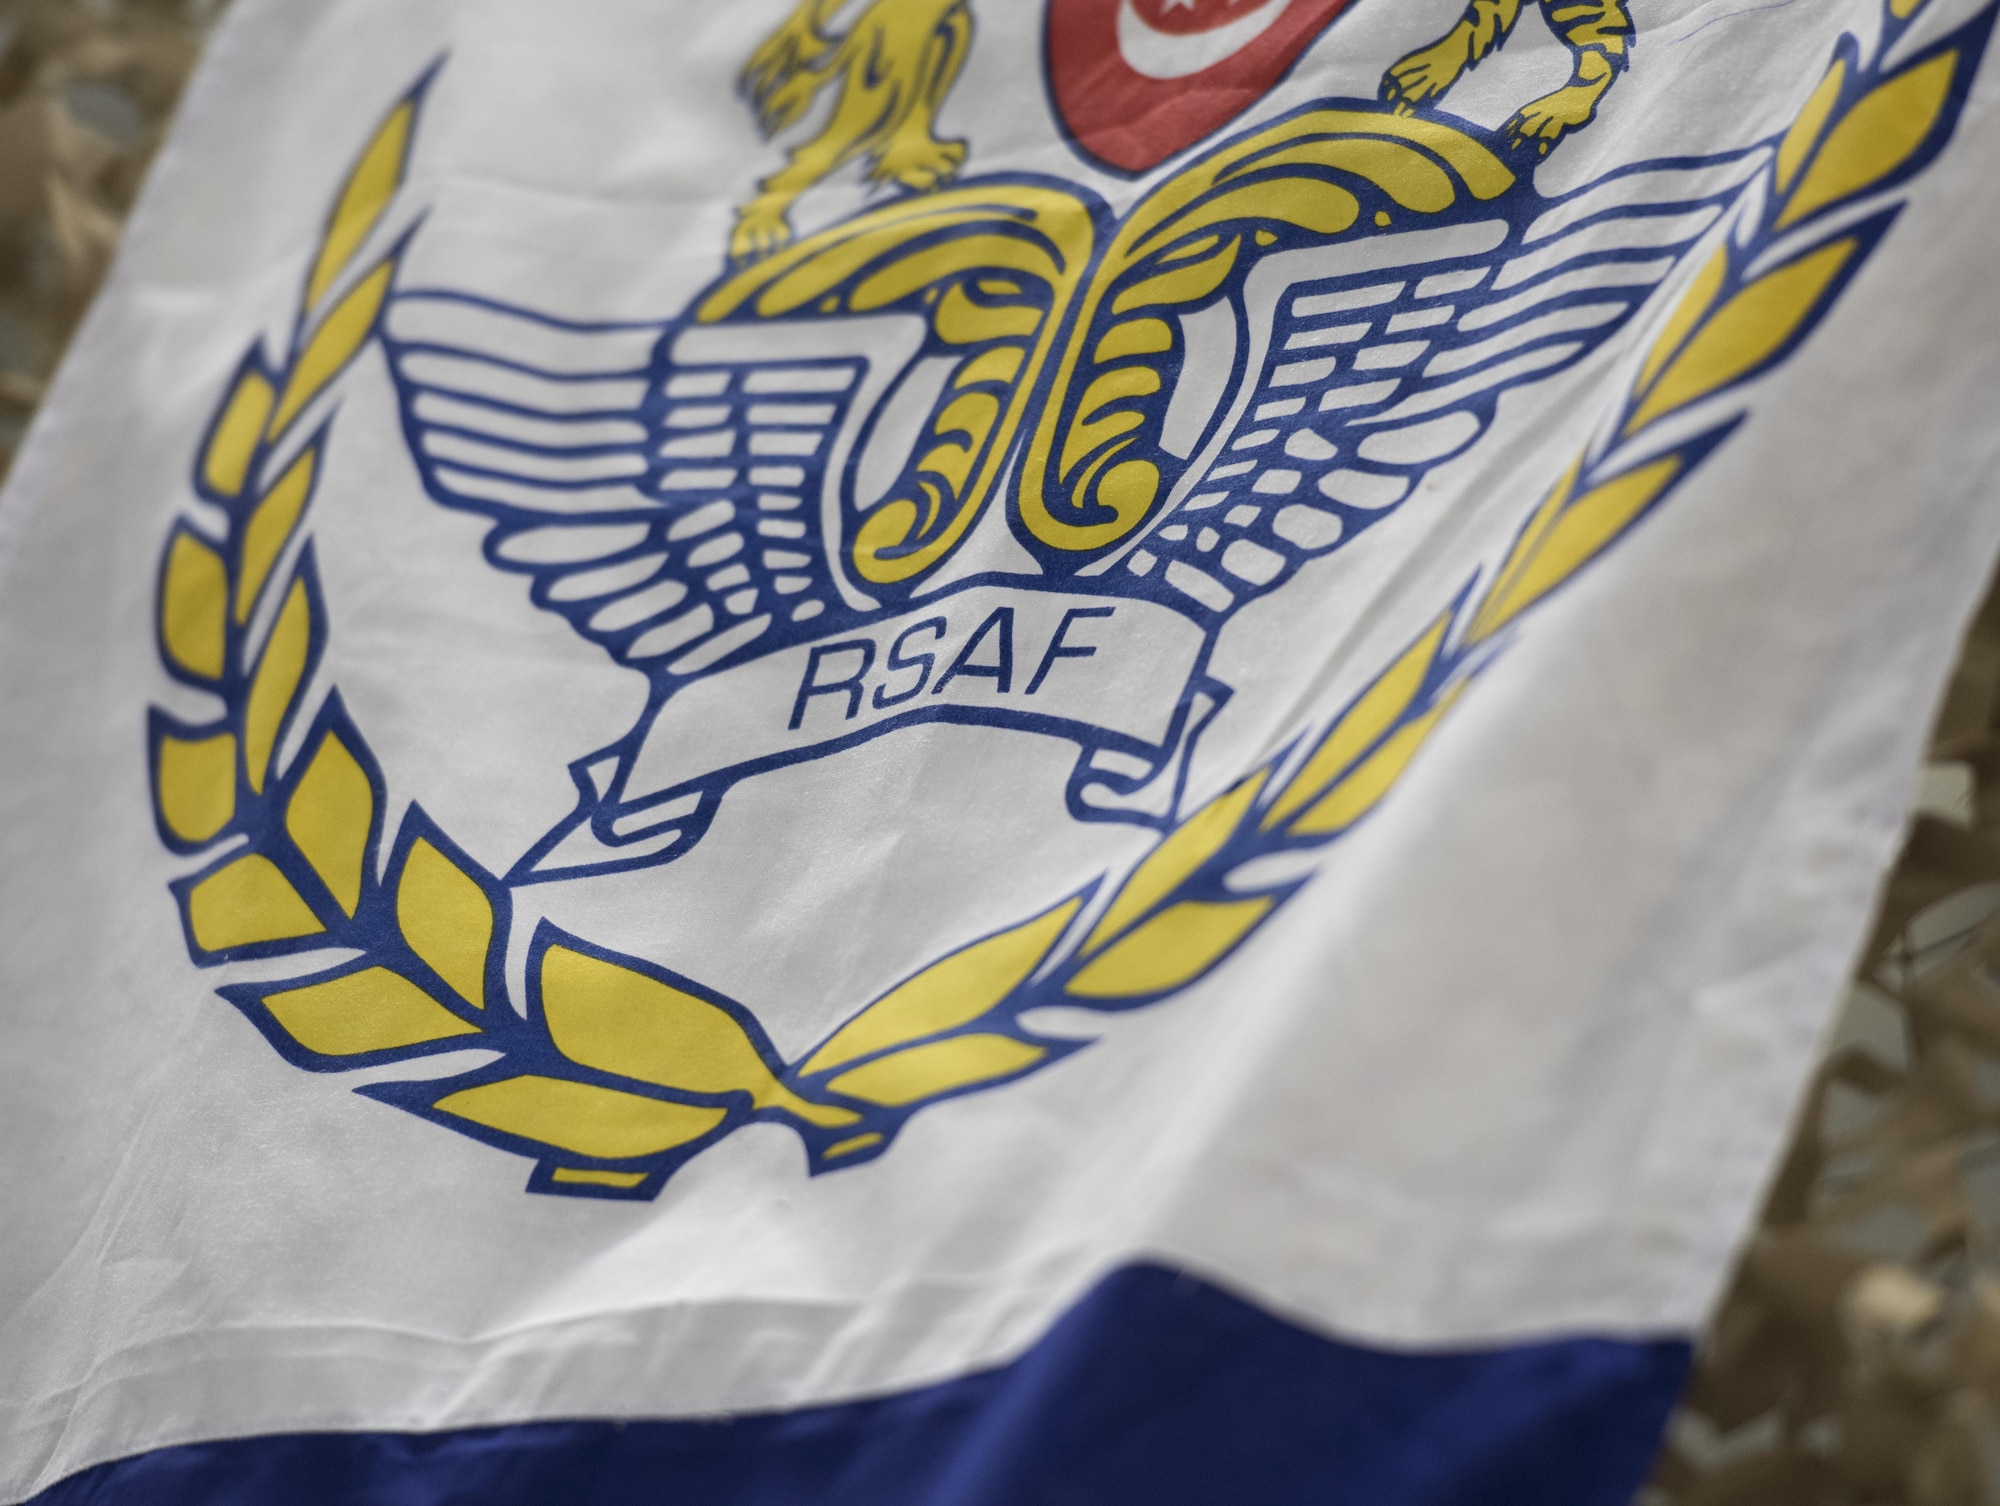 The Republic of Singapore Air Force crest is displayed on a flag at the National Day celebration, August 5, 2016 at Mountain Home AFB. The crest symbolizes equality, peace, progress, democracy and justice. (U.S. Air Force photo by Airman Alaysia Berry/Released)